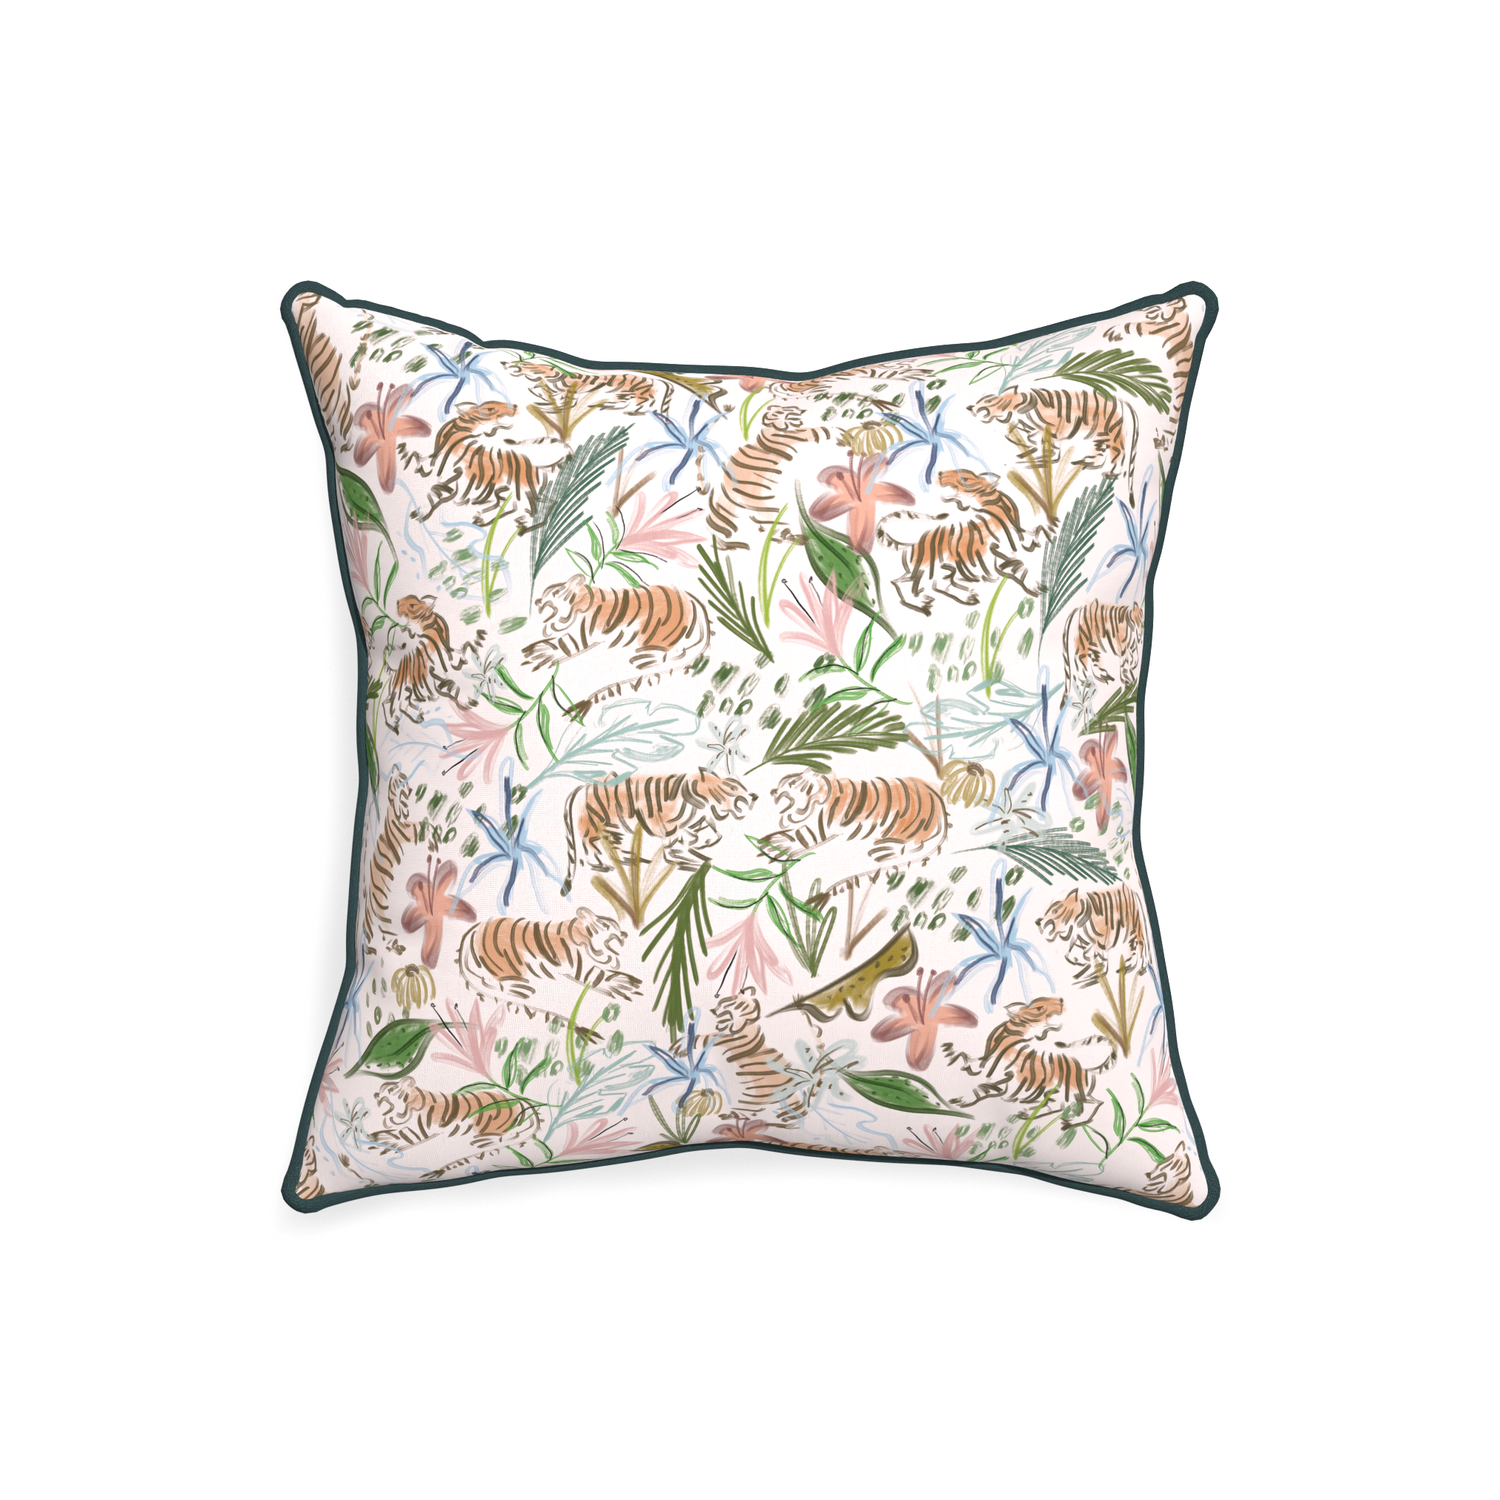 20-square frida pink custom pink chinoiserie tigerpillow with p piping on white background